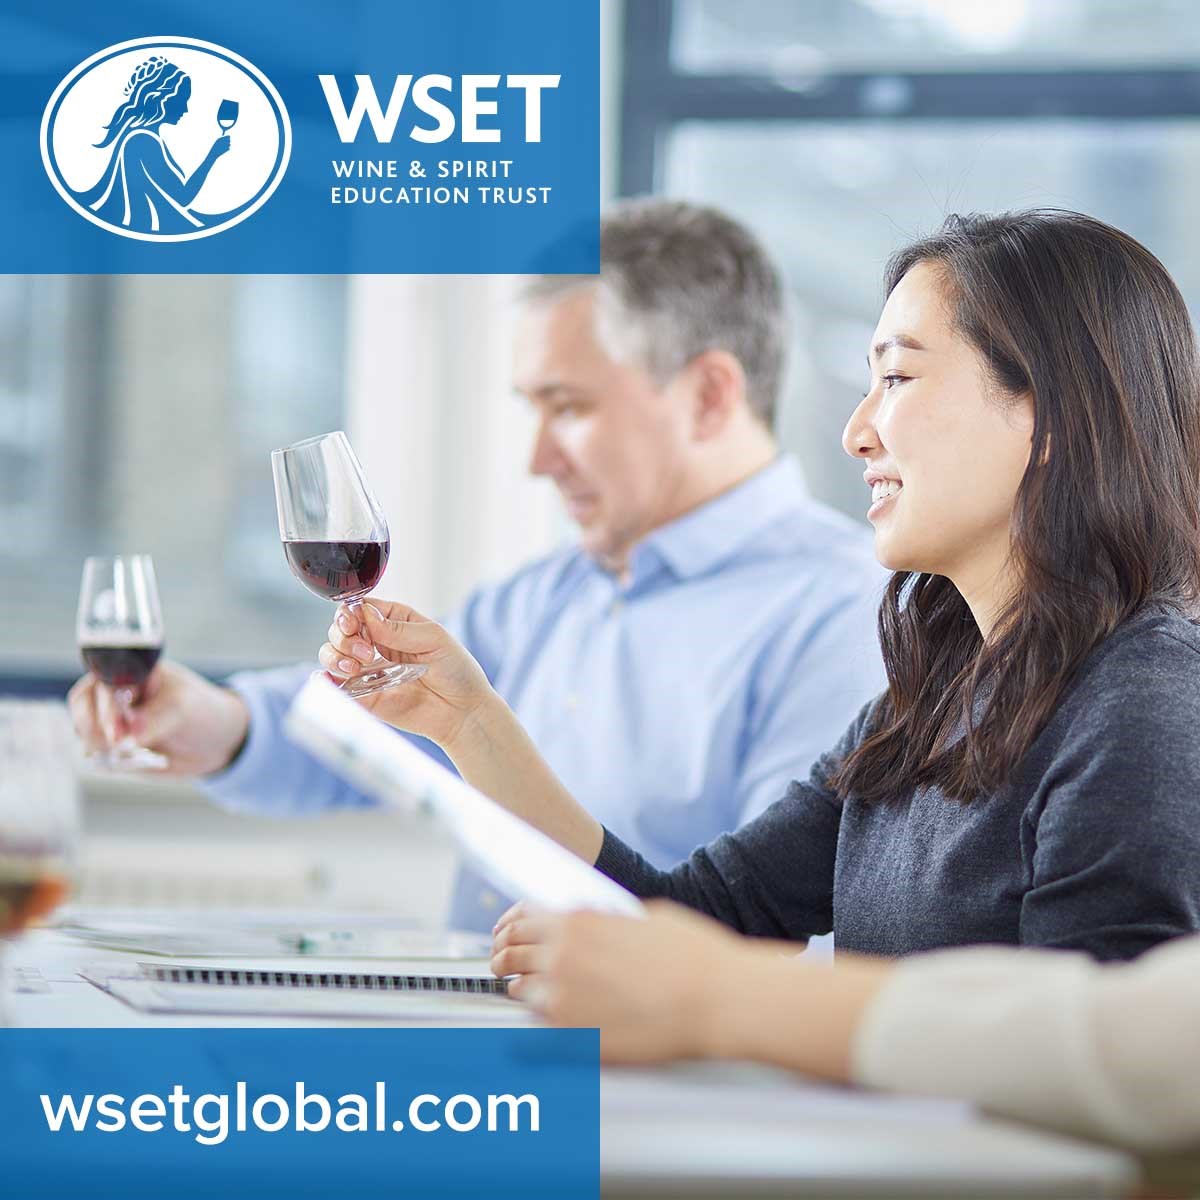 WSET Level 2 Award In Wine : Notts Derby Local Wine School - Wine Tasting  Nottingham and Derby, Wine Courses Nottingham and Derby, WSET Courses  Nottingham and Derby & Corporate Wine Events